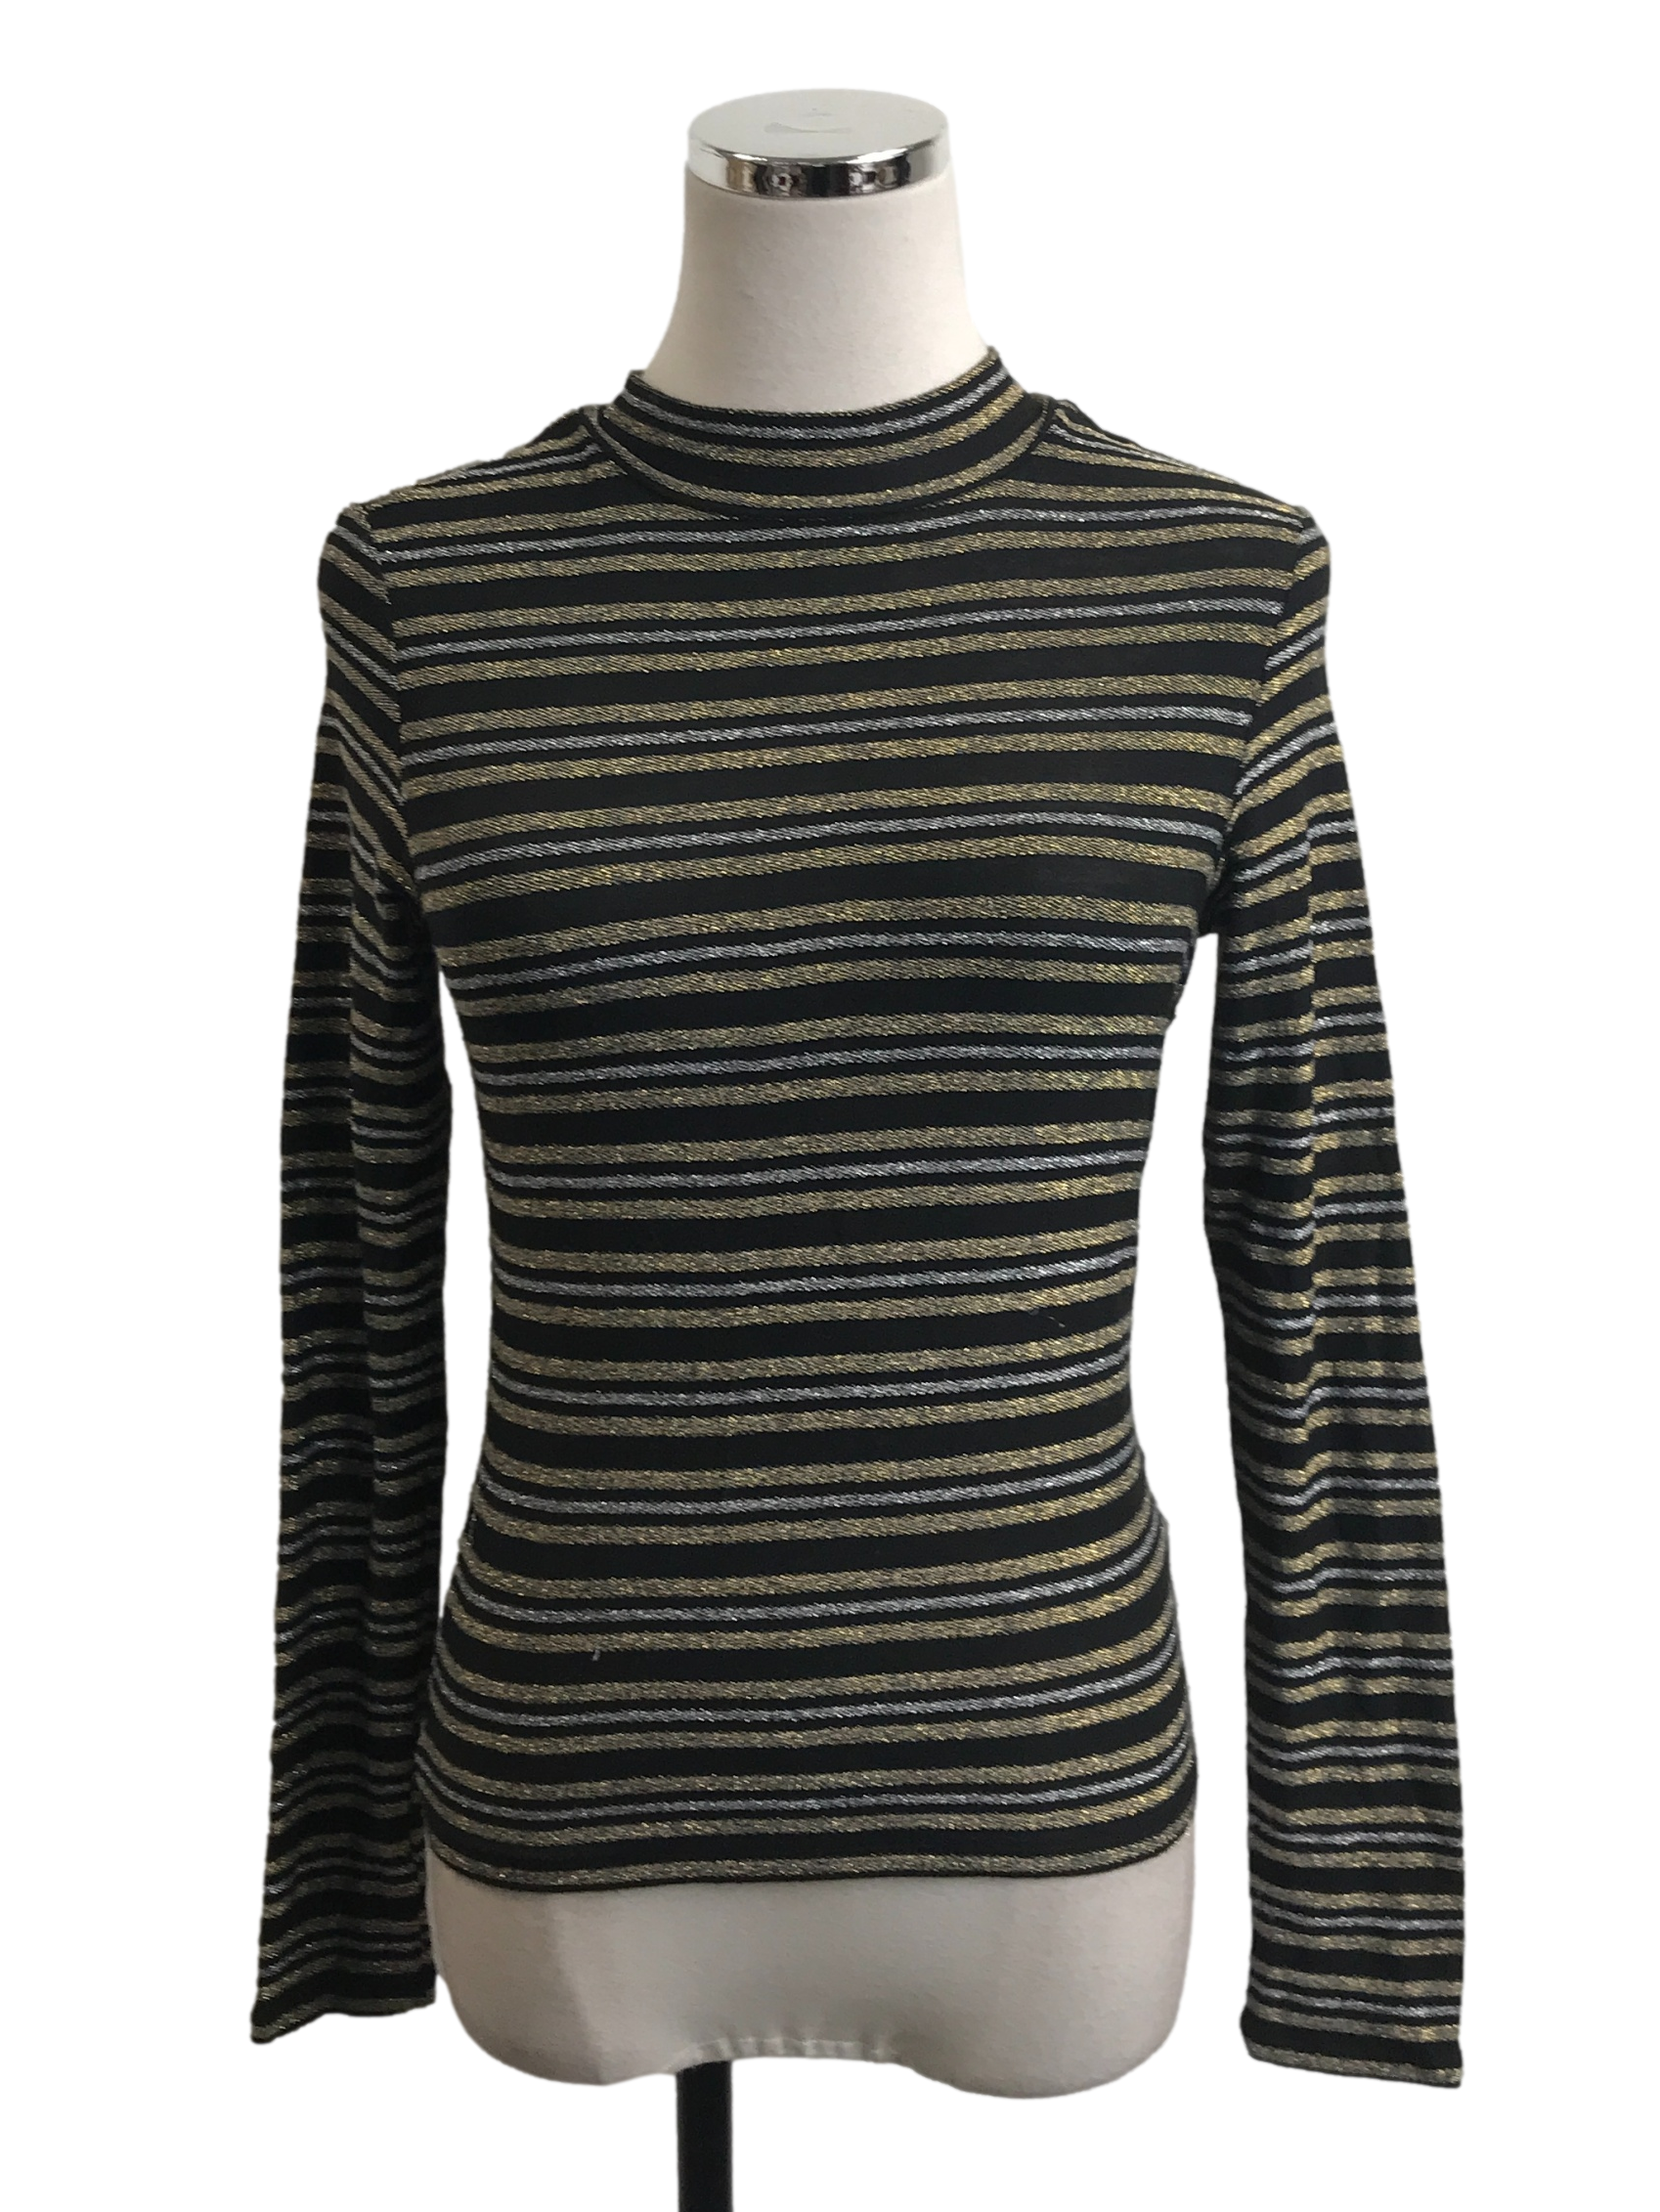 Black And Gold Glittery Mock Neck Top